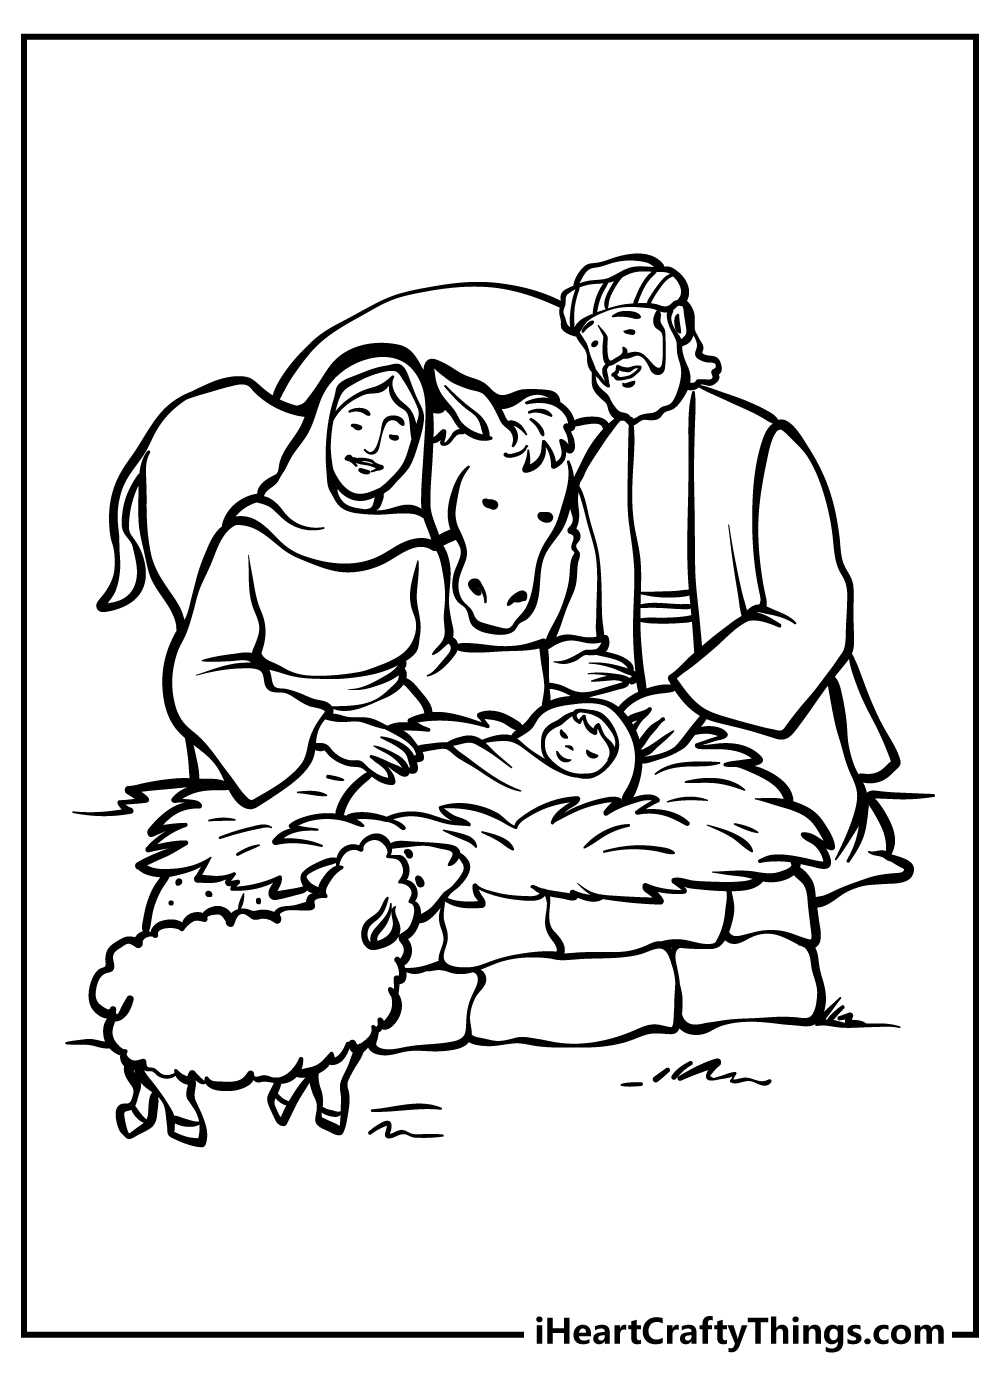 Nativity Coloring Sheet for children free download